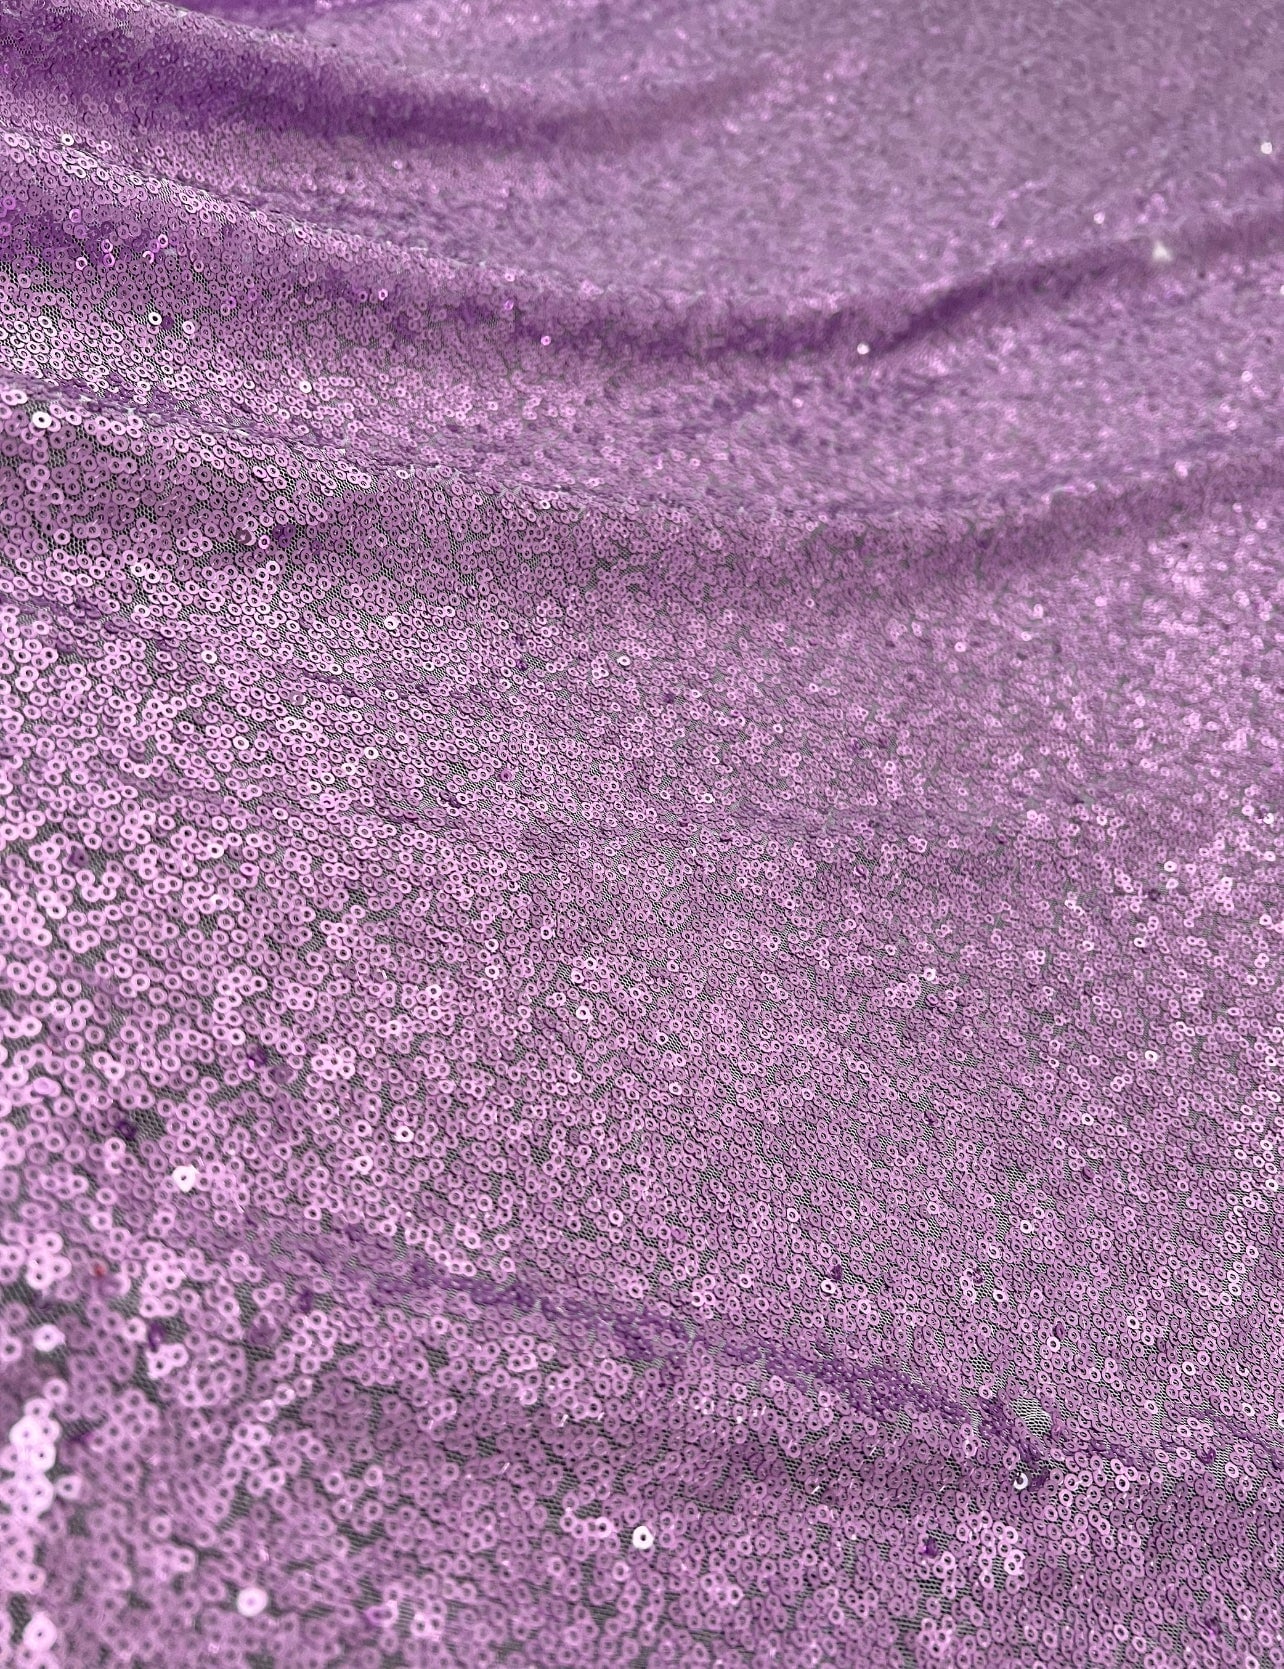 Lavender Sequin on Mesh, purple Sequin on Mesh, purple Sequin, eco-friendly fabric, pure Sequin on Mesh fabric, stretch sequin mesh, sequin fabric, kiki textiles, sewing